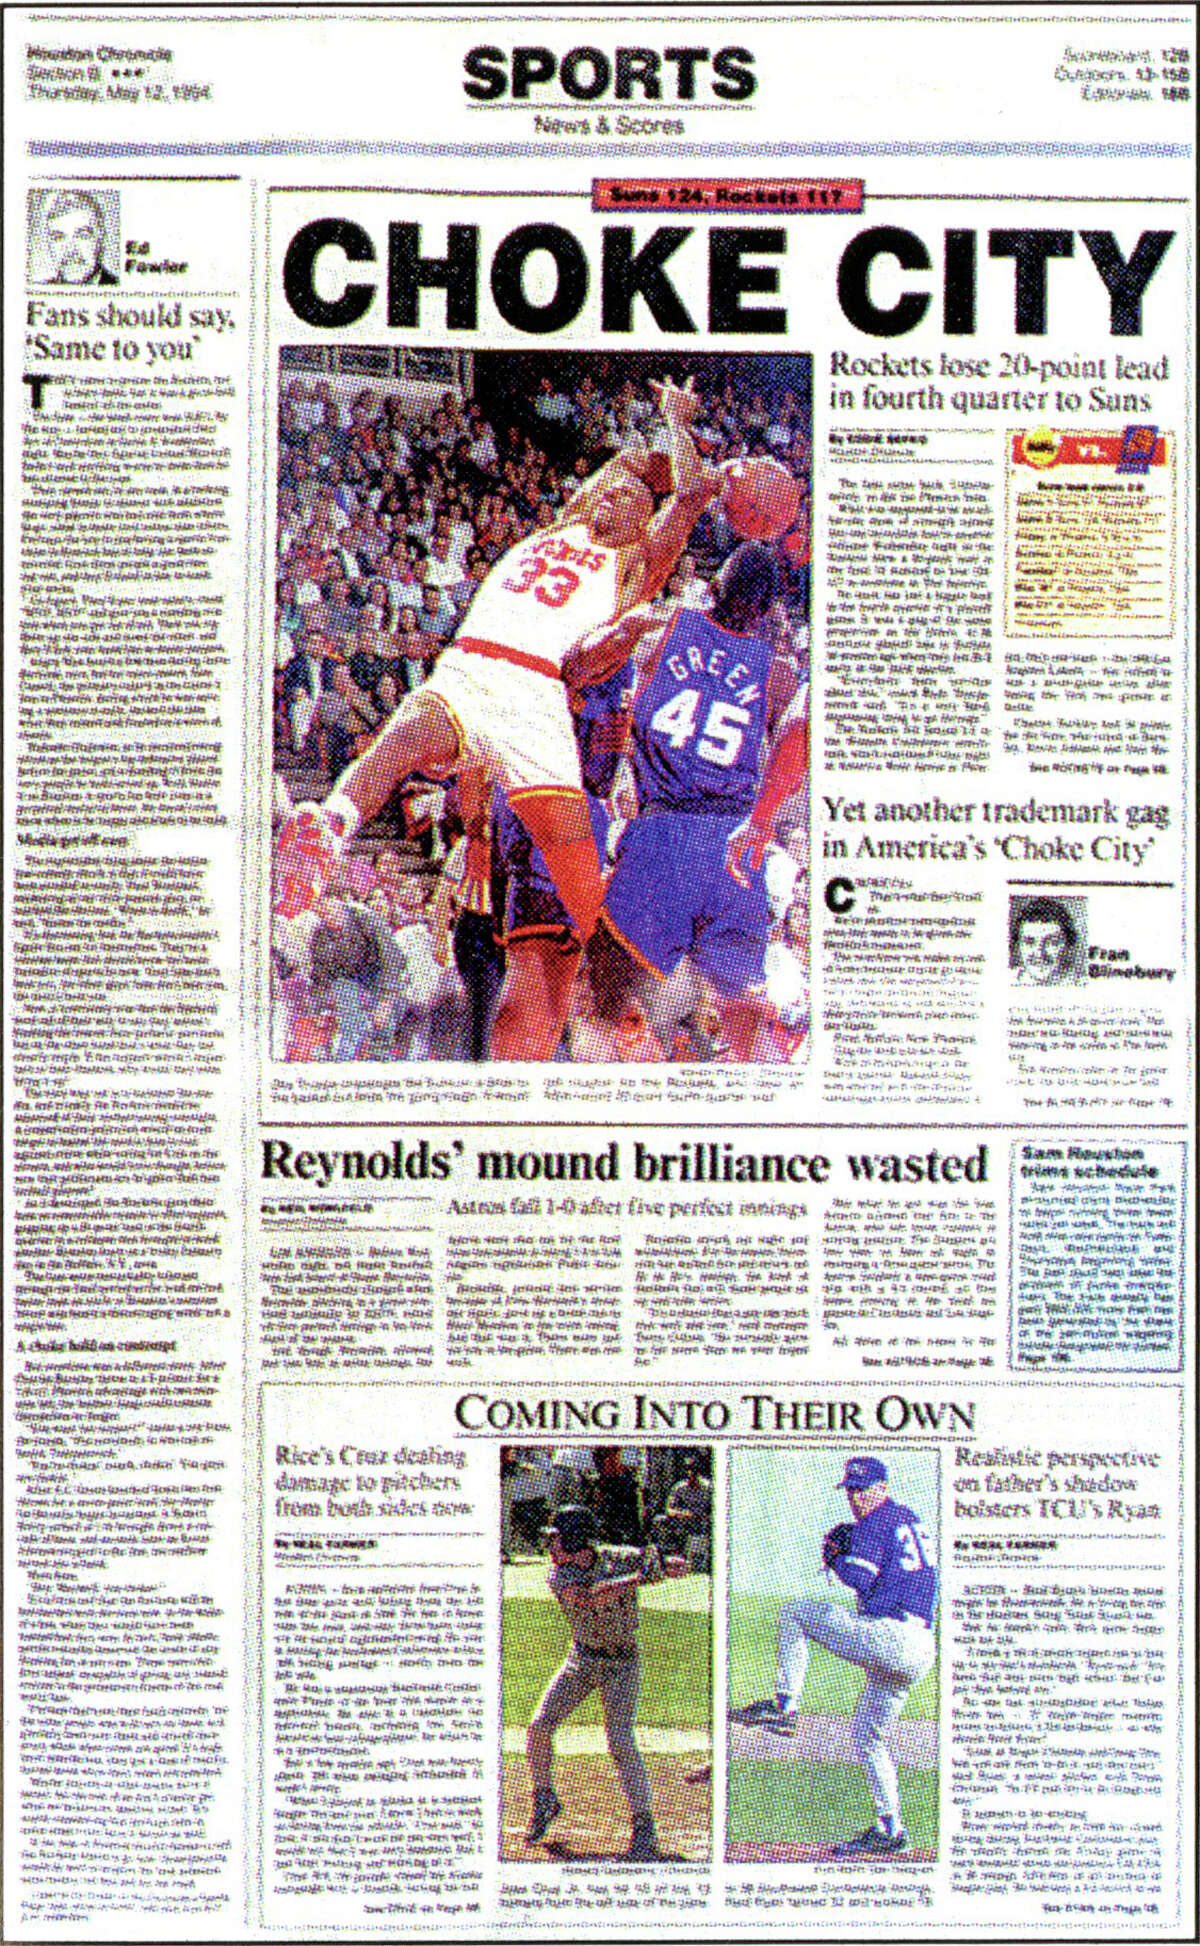 The Chronicle's Sports cover on May 12, 1994, blared "Choke City" after the Rockets blew a 20-point lead in Game 2.